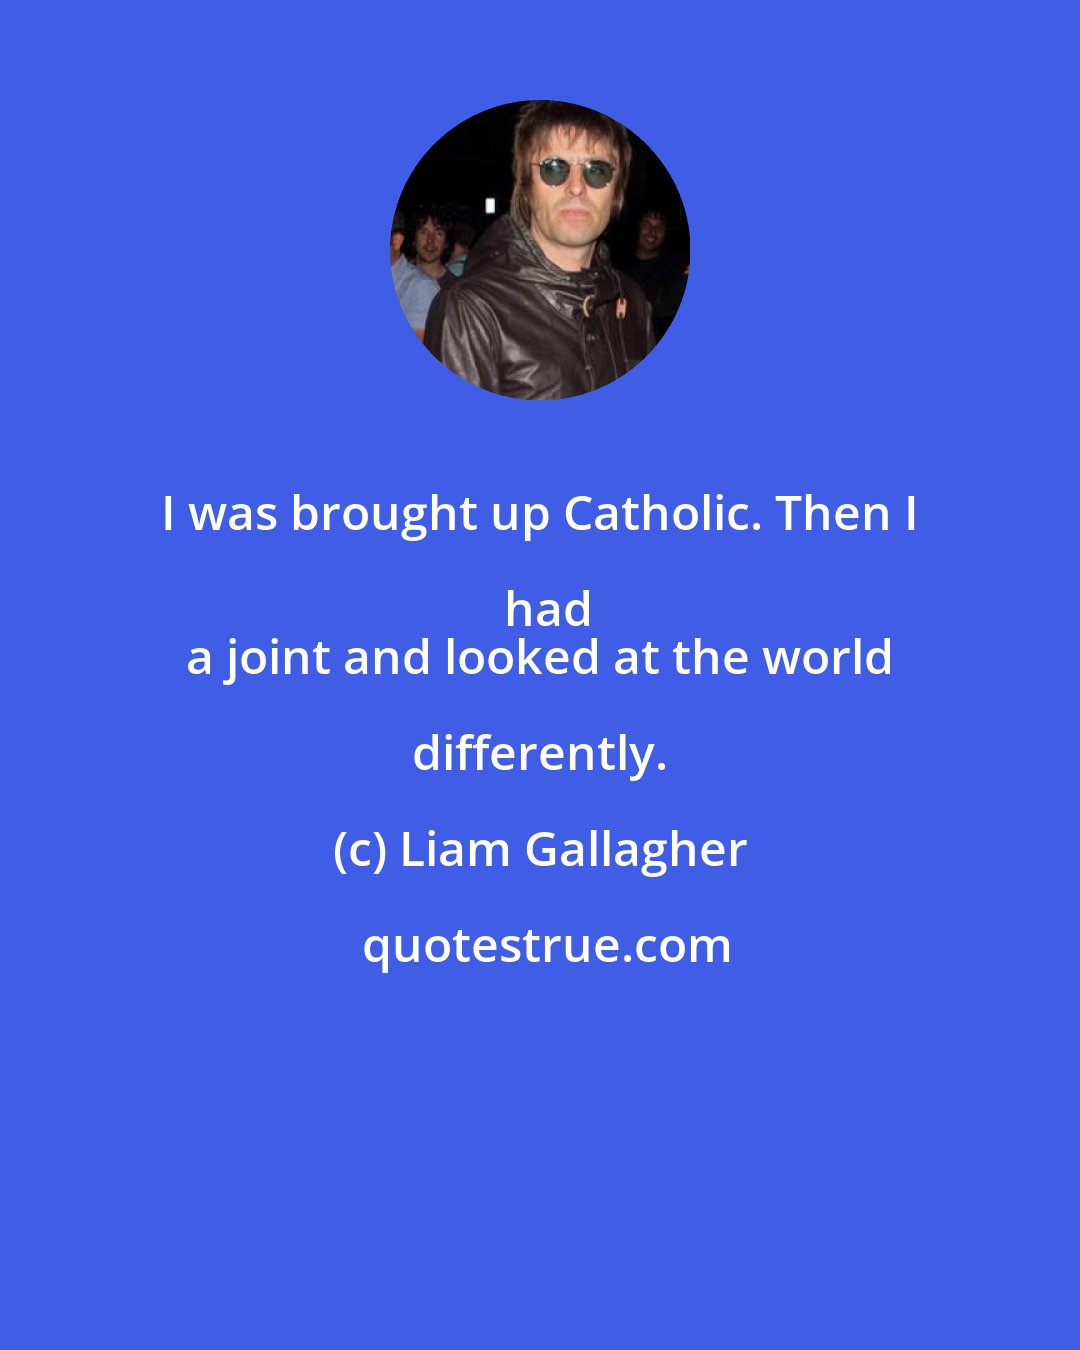 Liam Gallagher: I was brought up Catholic. Then I had
 a joint and looked at the world differently.